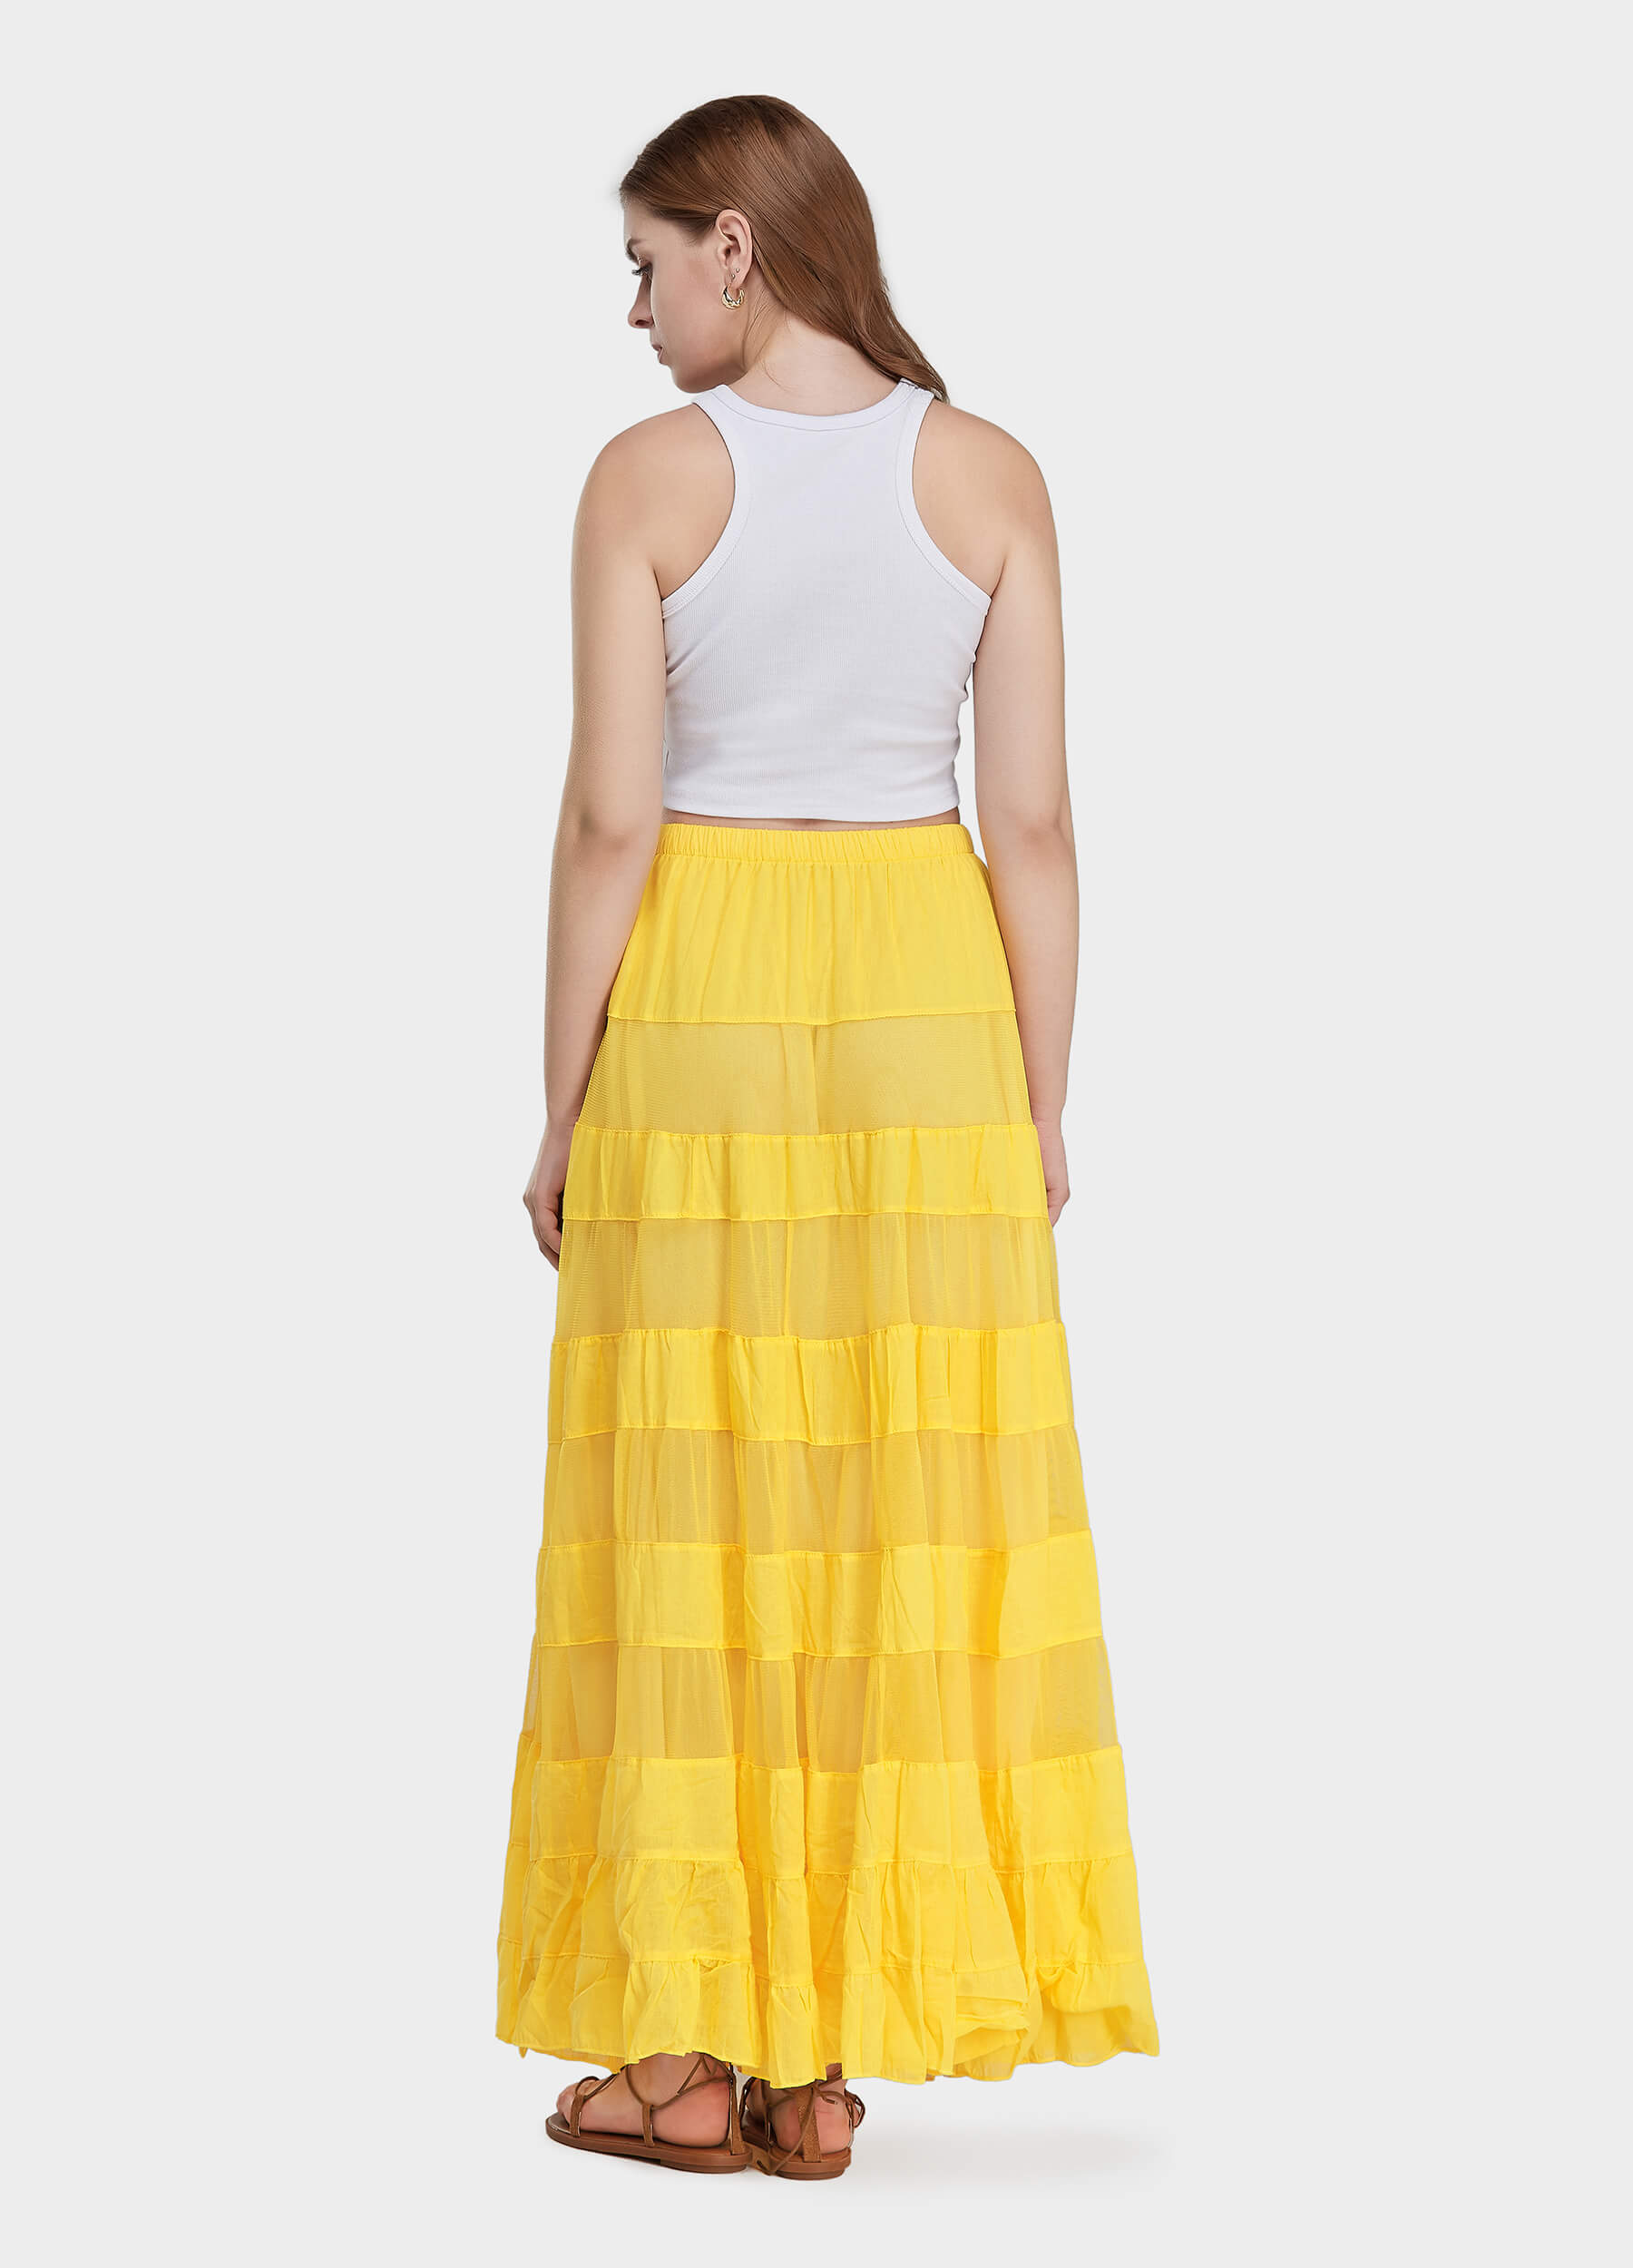 Women's Casual Elastic Waist Tiered Pleated Maxi Skirt-Yellow back view